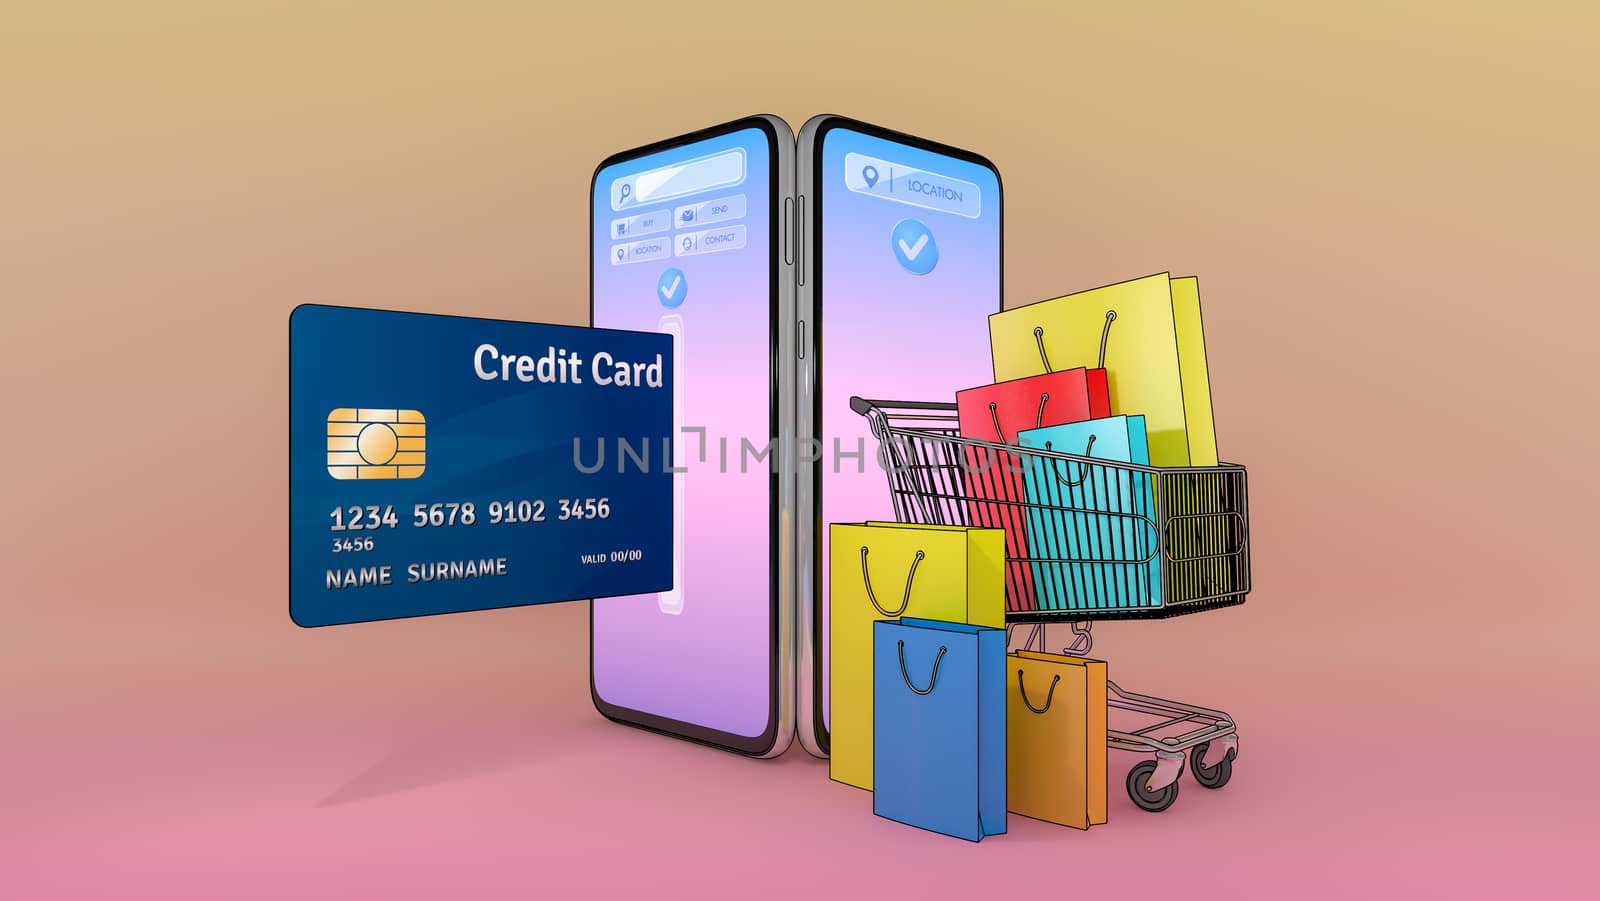 Many Shopping bag and price tag and credit card in a shopping cart appeared from smartphones screen., shopping online or shopaholic concept.,3d illustration with object clipping path. by anotestocker